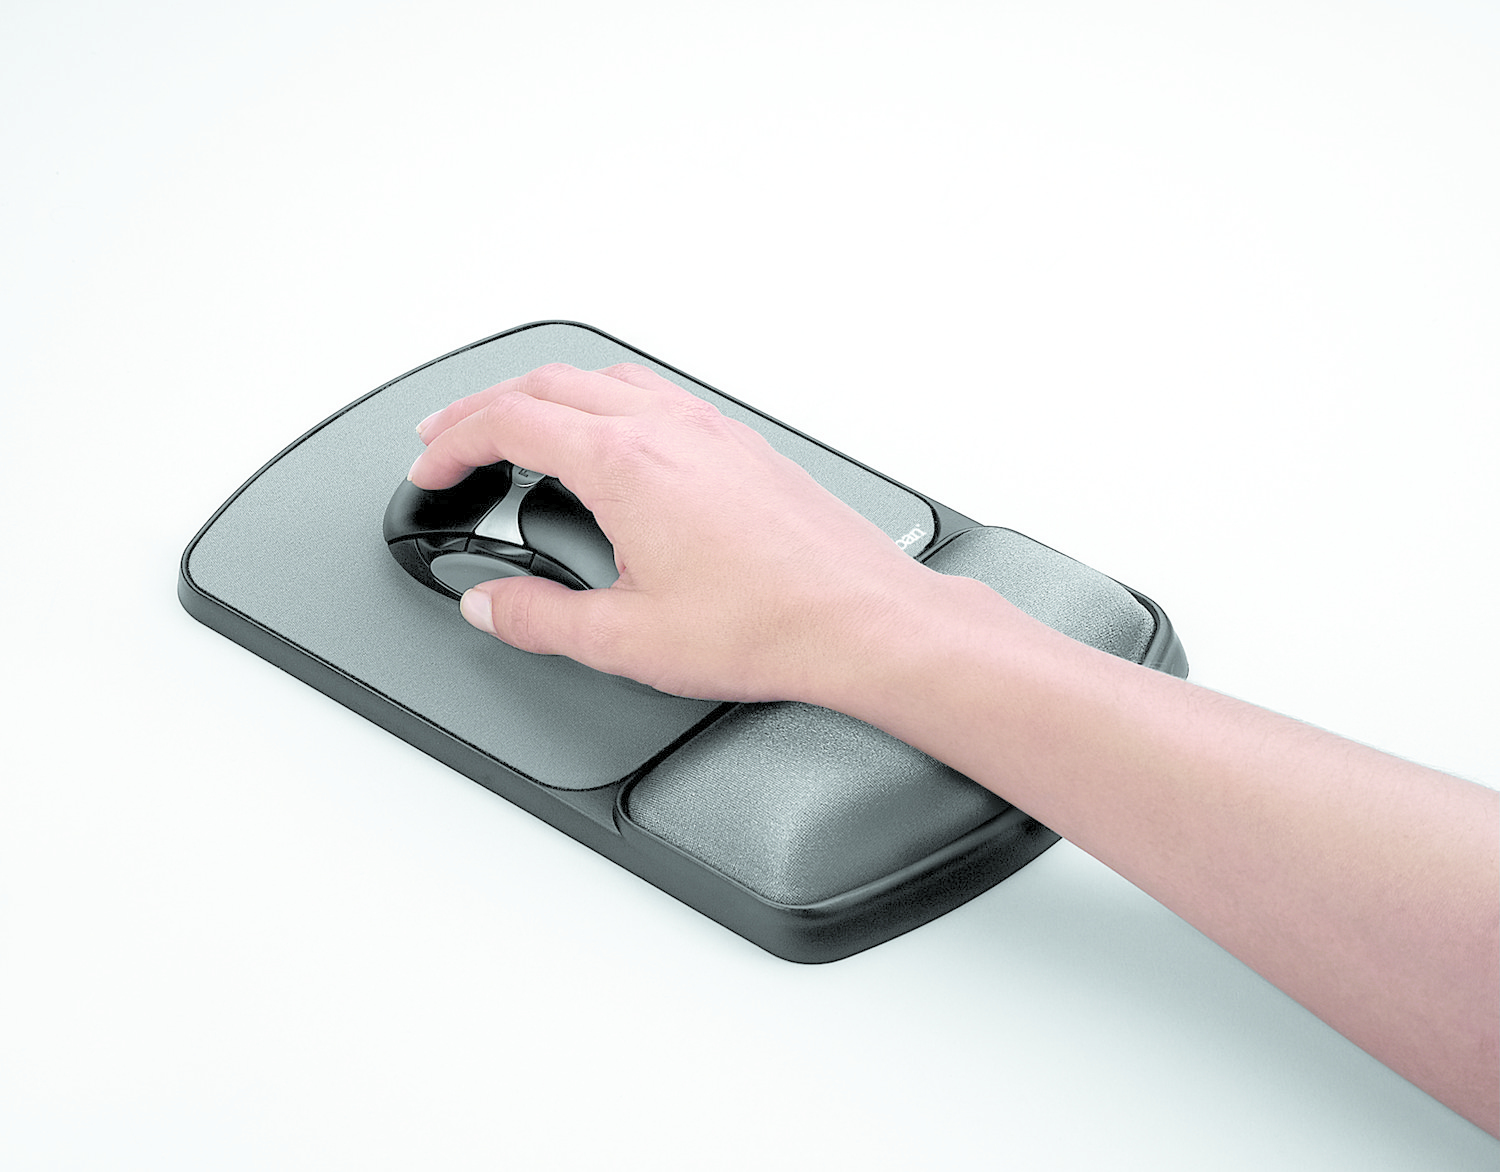 fellowes mouse pad with wrist rest